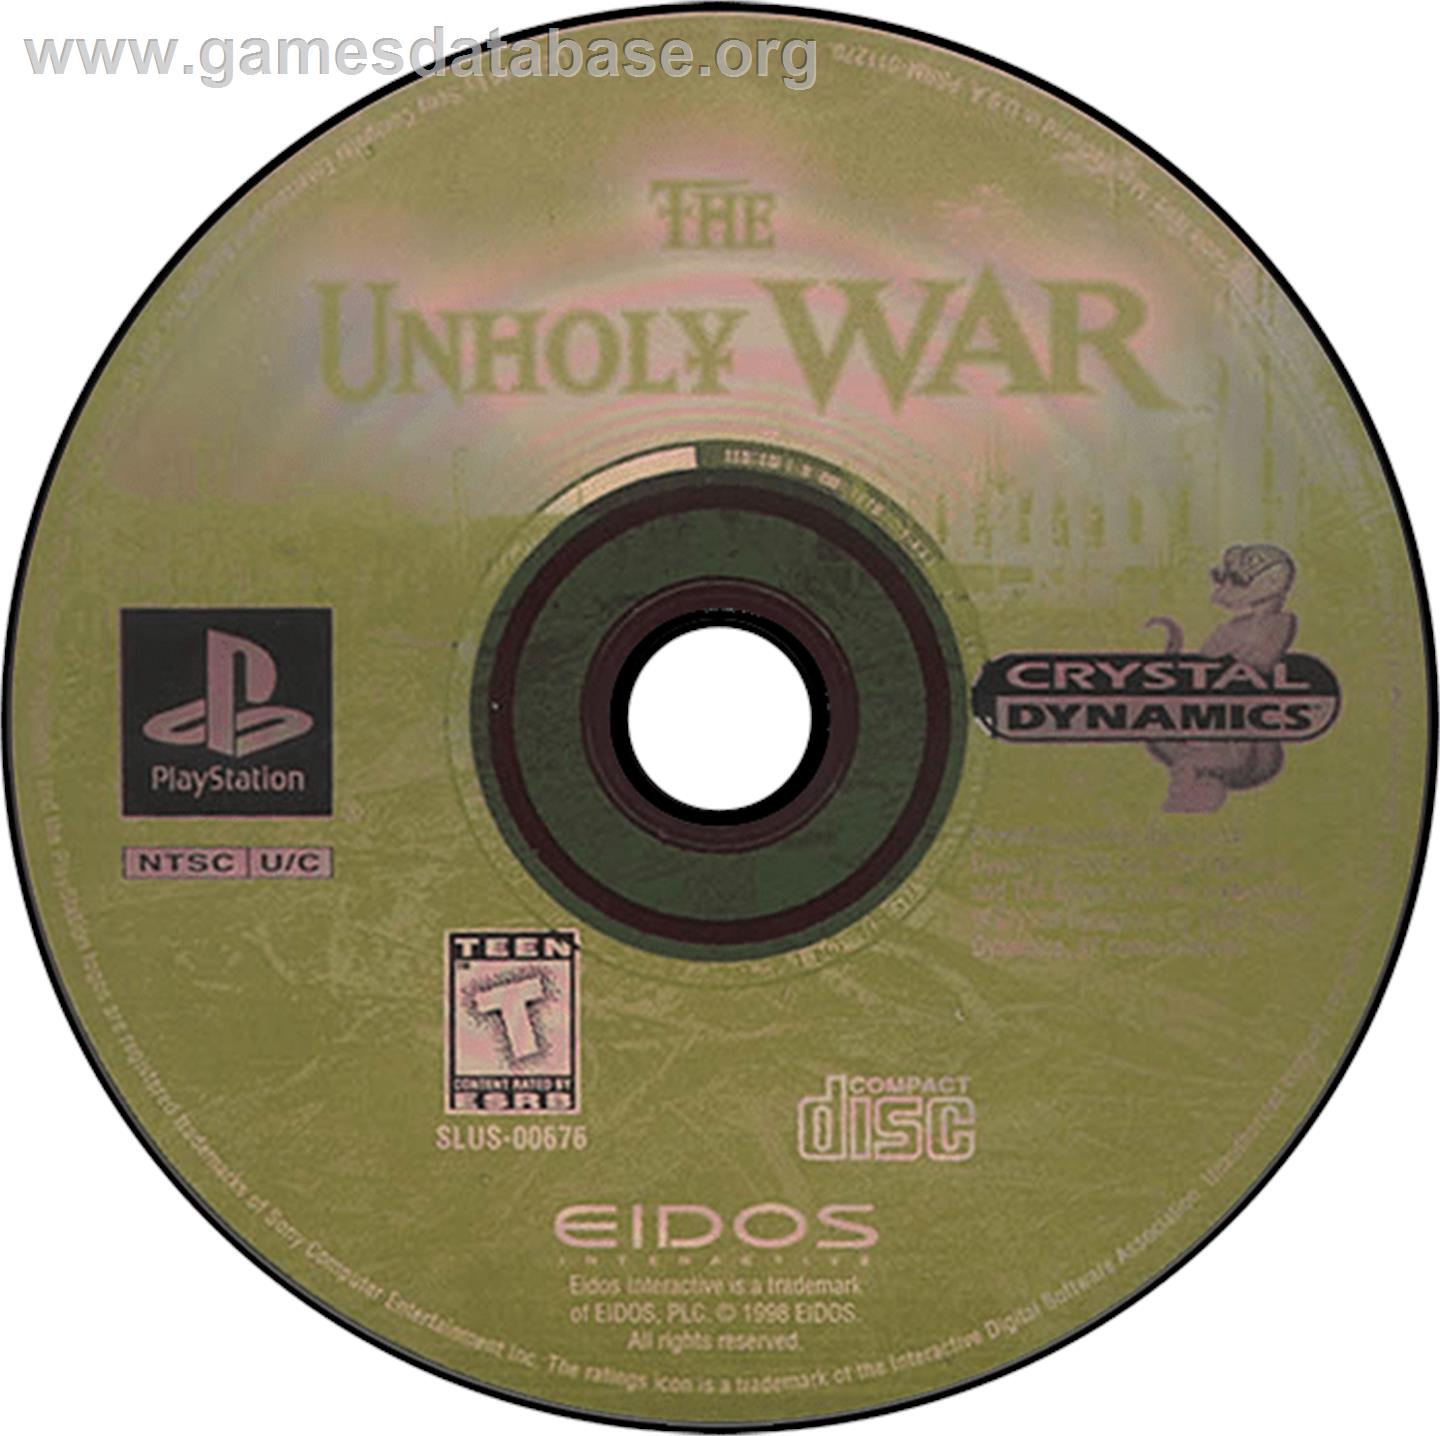 The Unholy War - Sony Playstation - Artwork - Disc